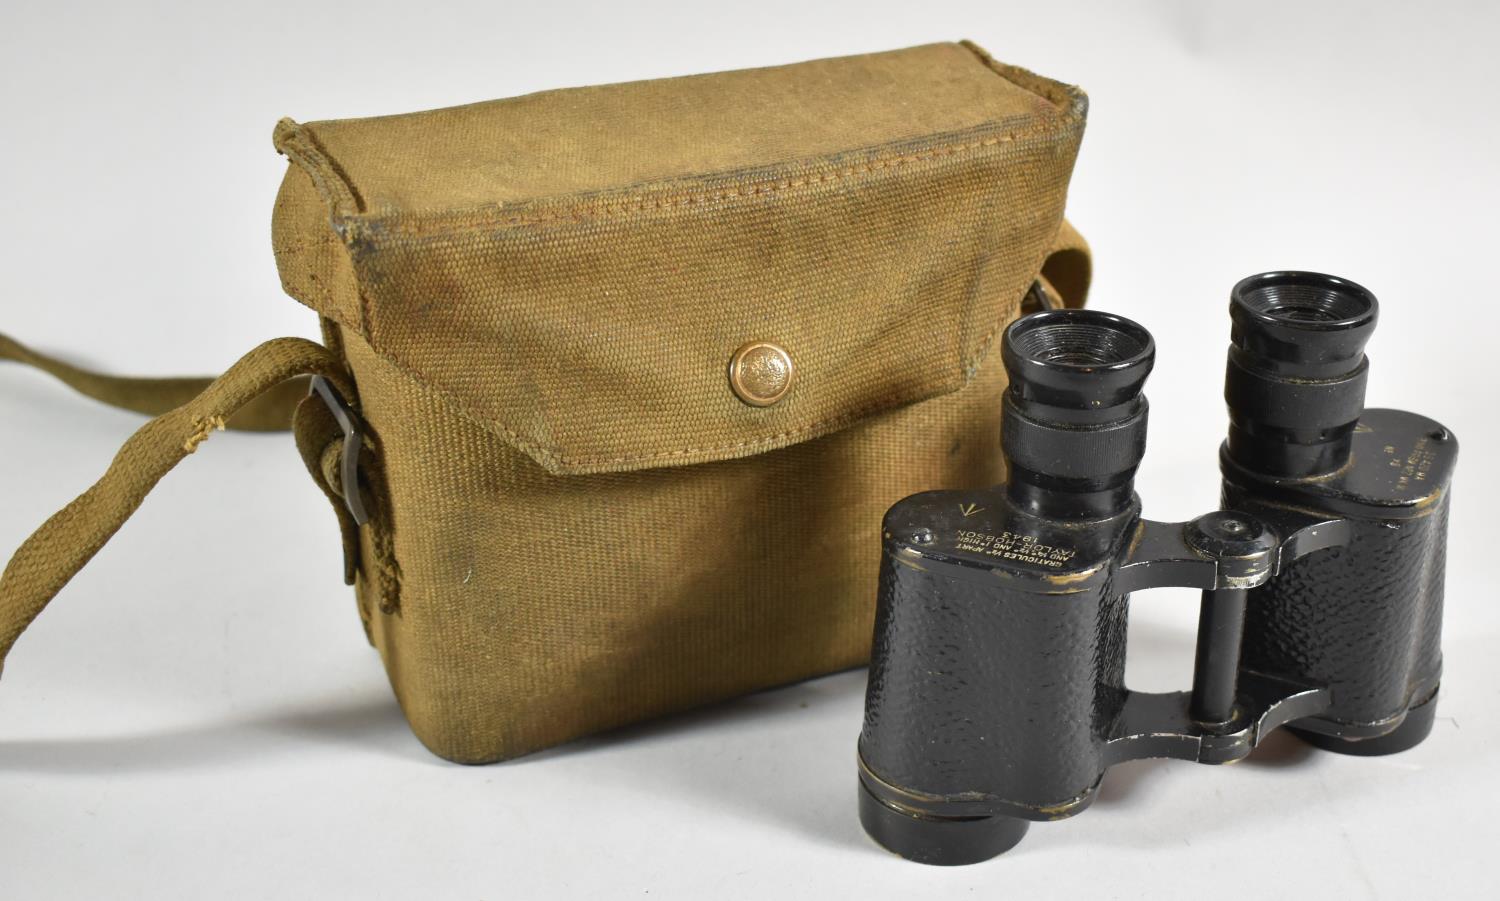 A Pair of WWII Taylor-Hobson Binoculars in Canvas Carrying Case, Stamped with War Department Arrow